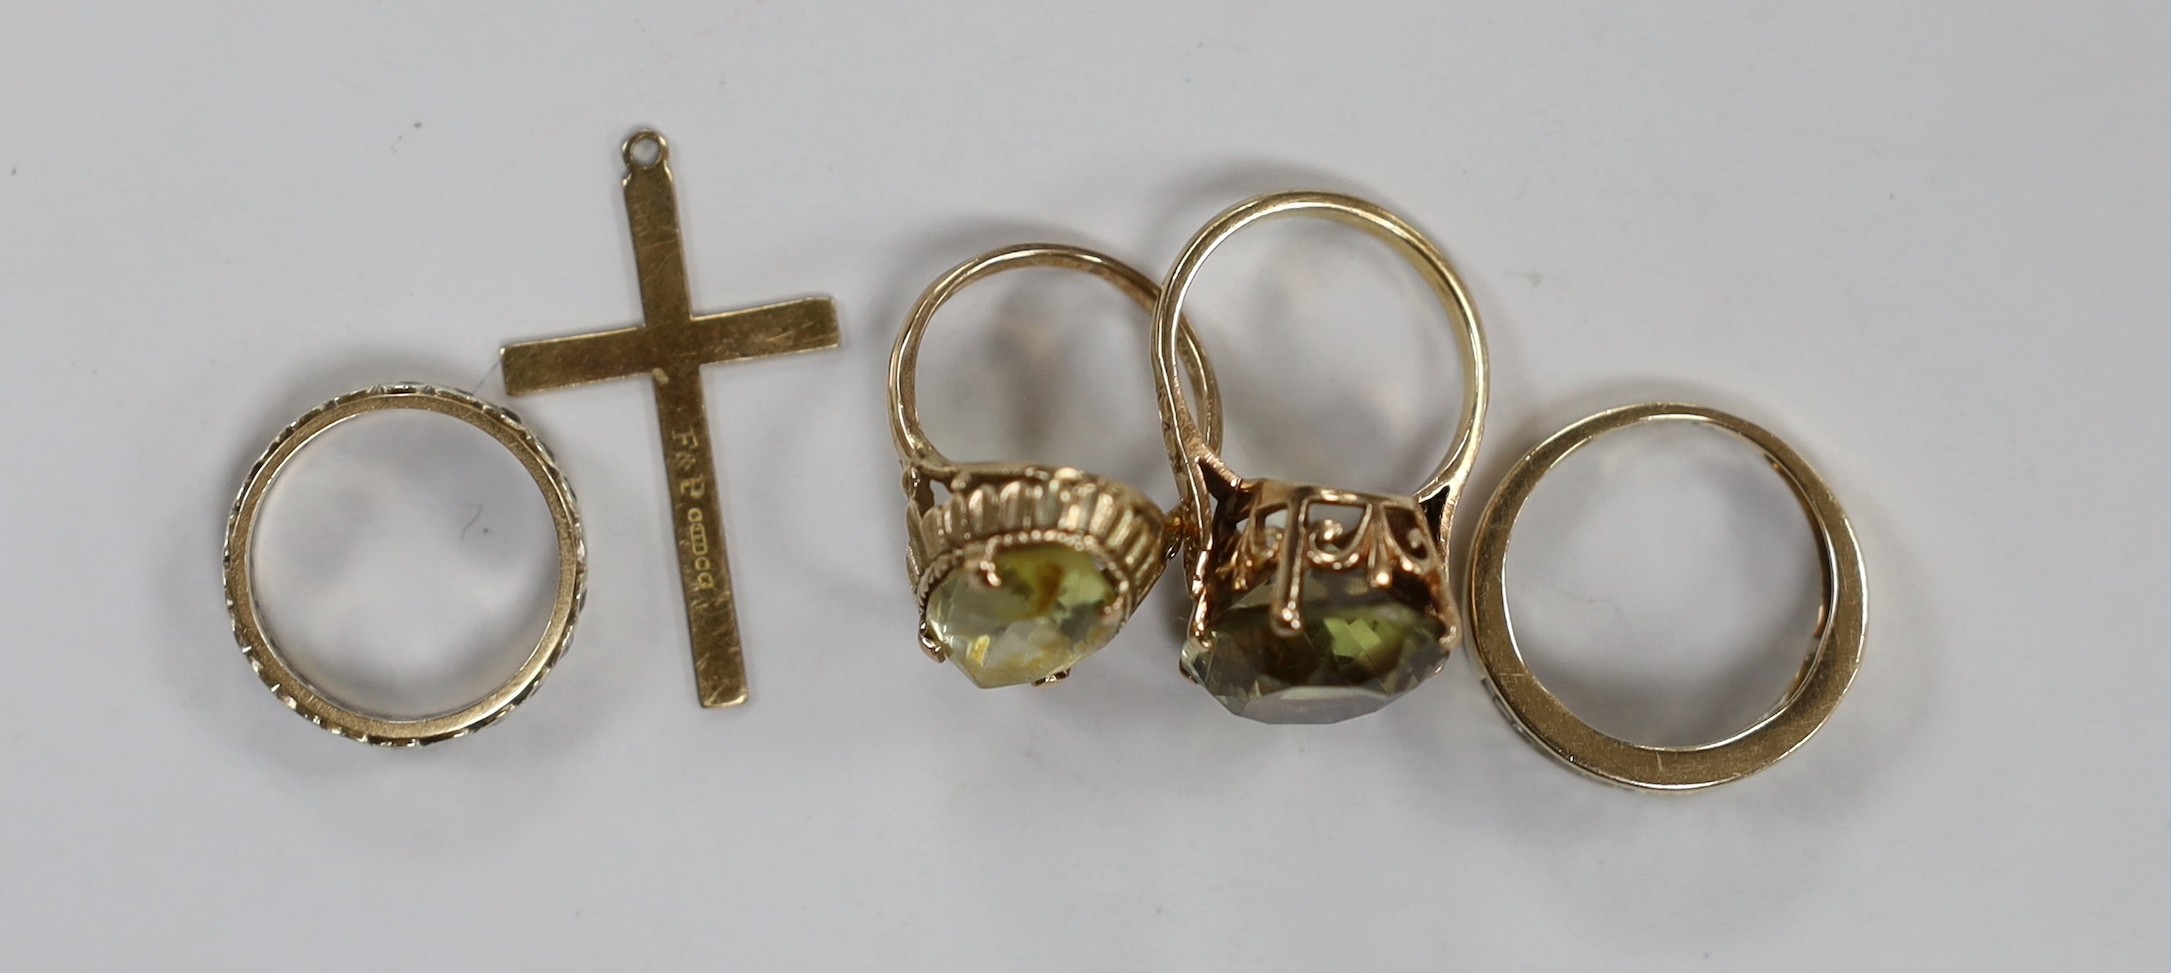 Three 9ct gold and gem set rings, gross 13.4 grams, a 9ct gold cross and one other yellow metal ring.